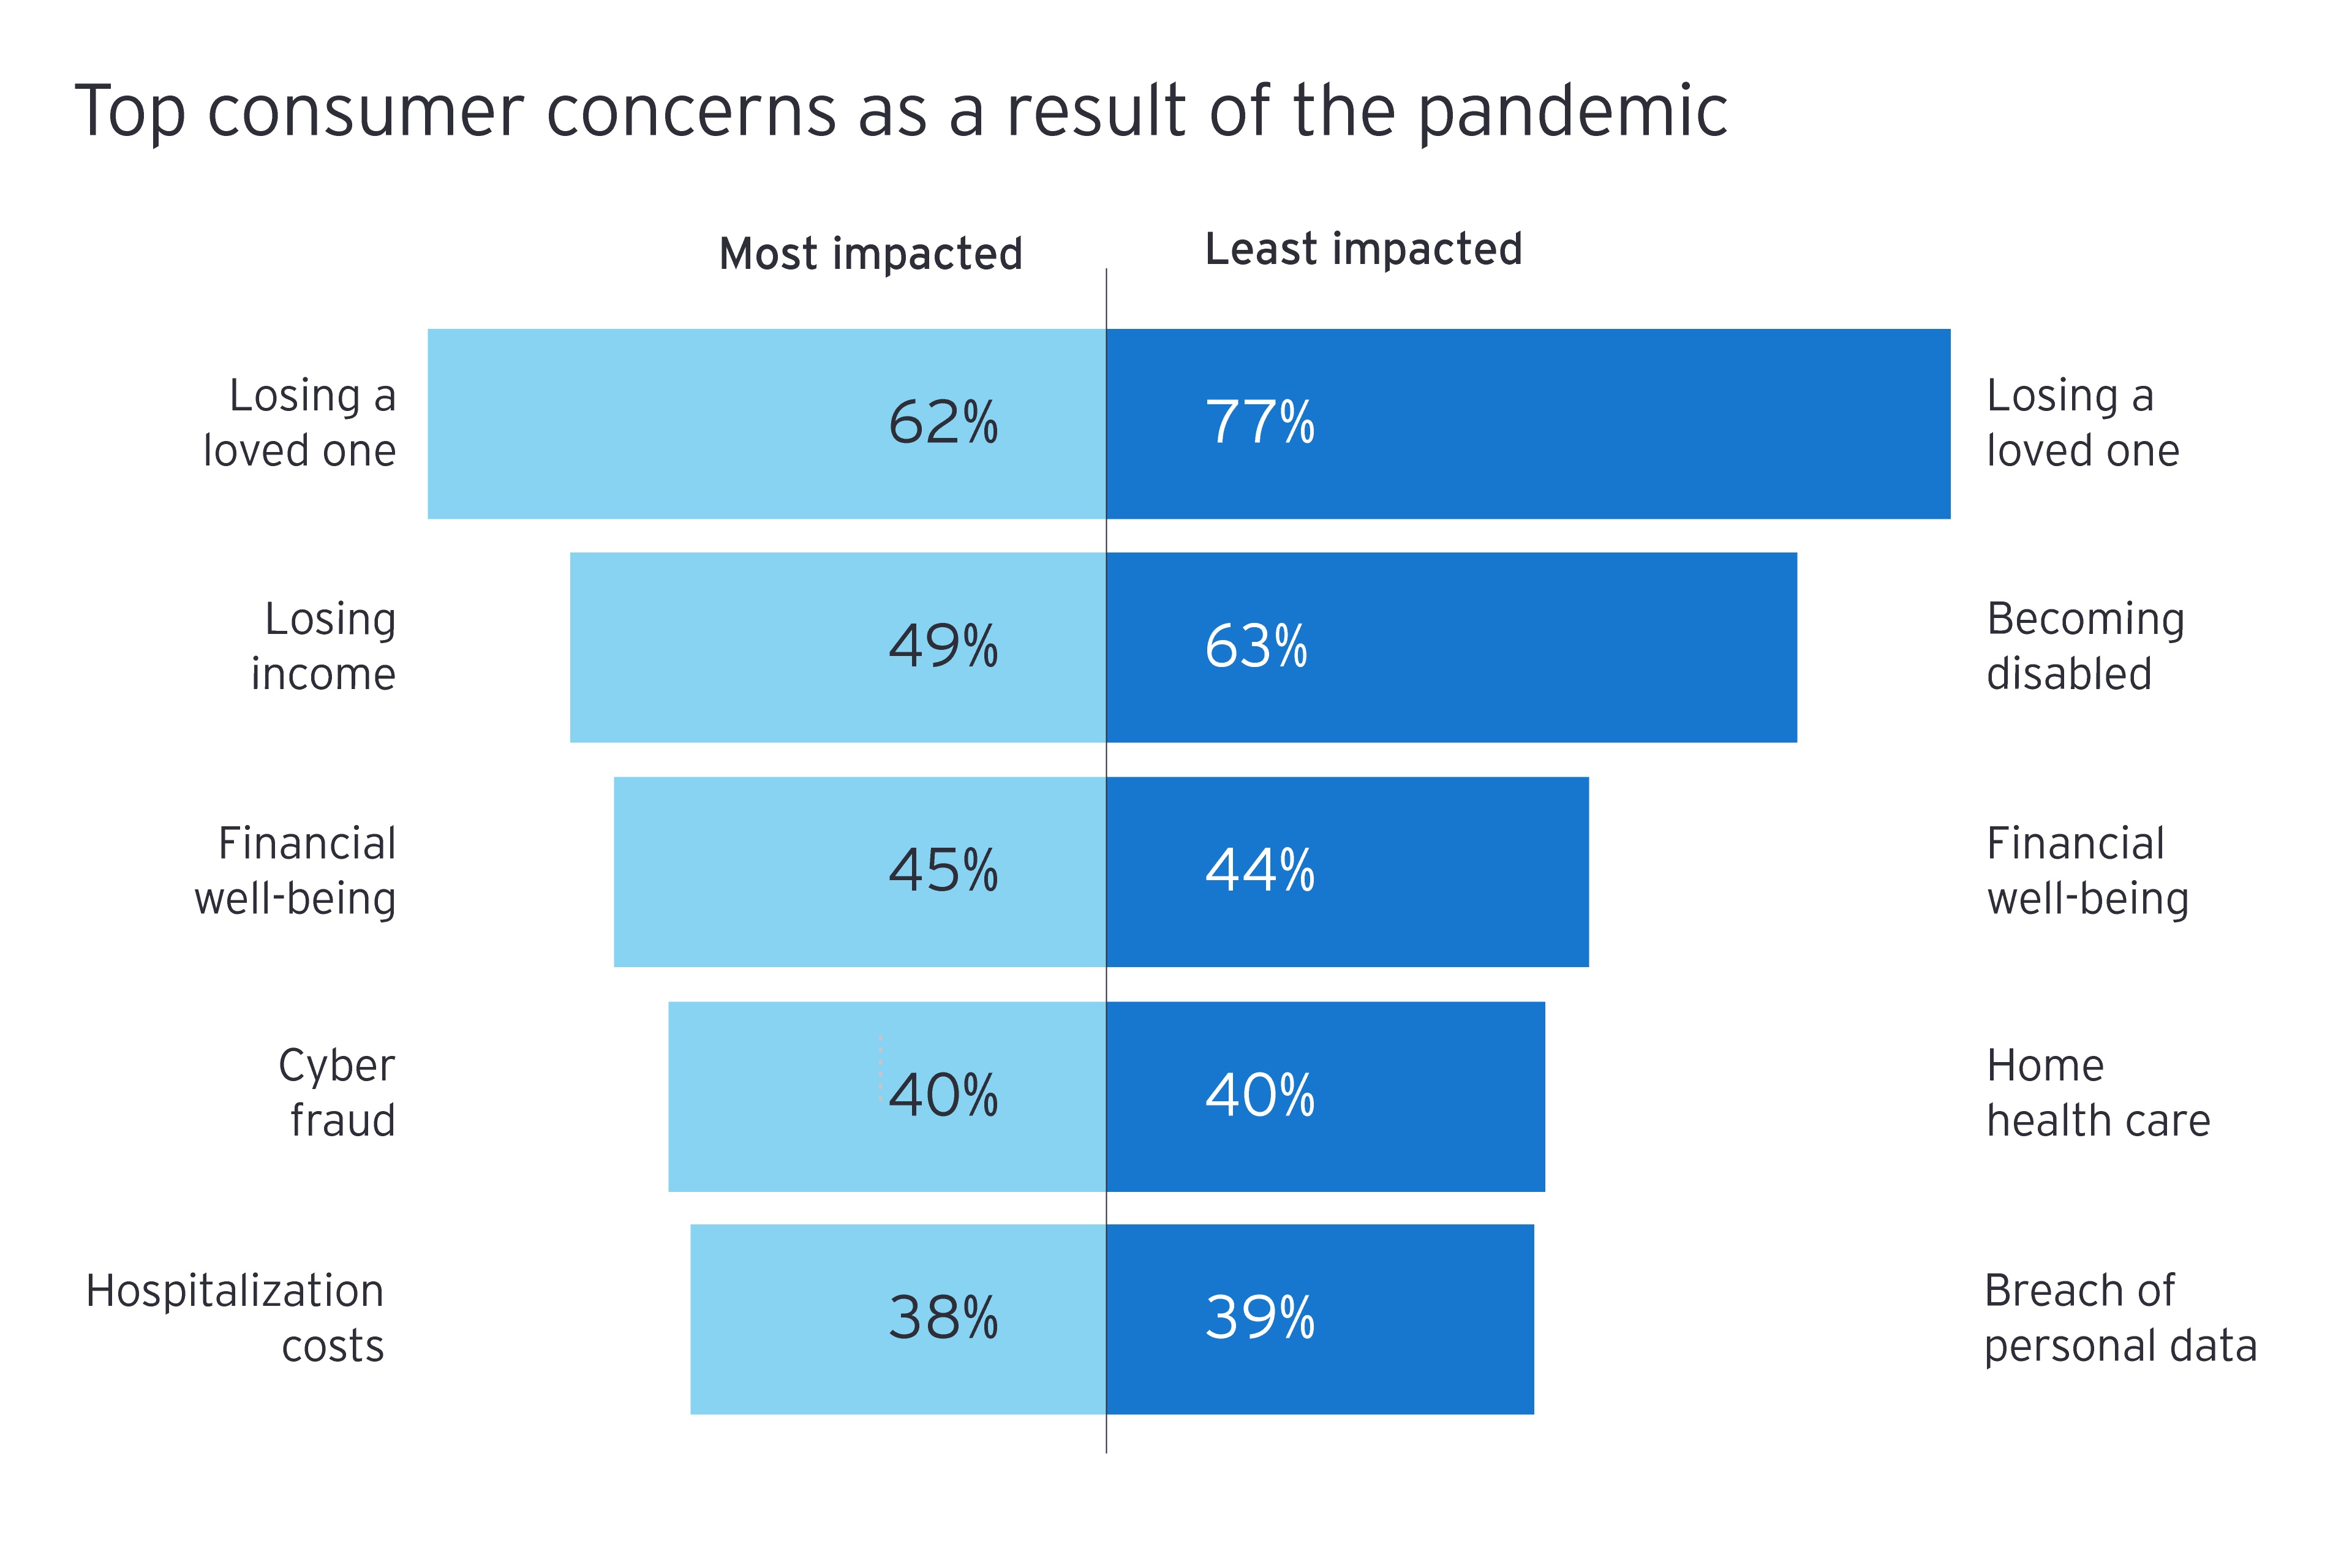 Top consumer concerns as a result of the pandemic